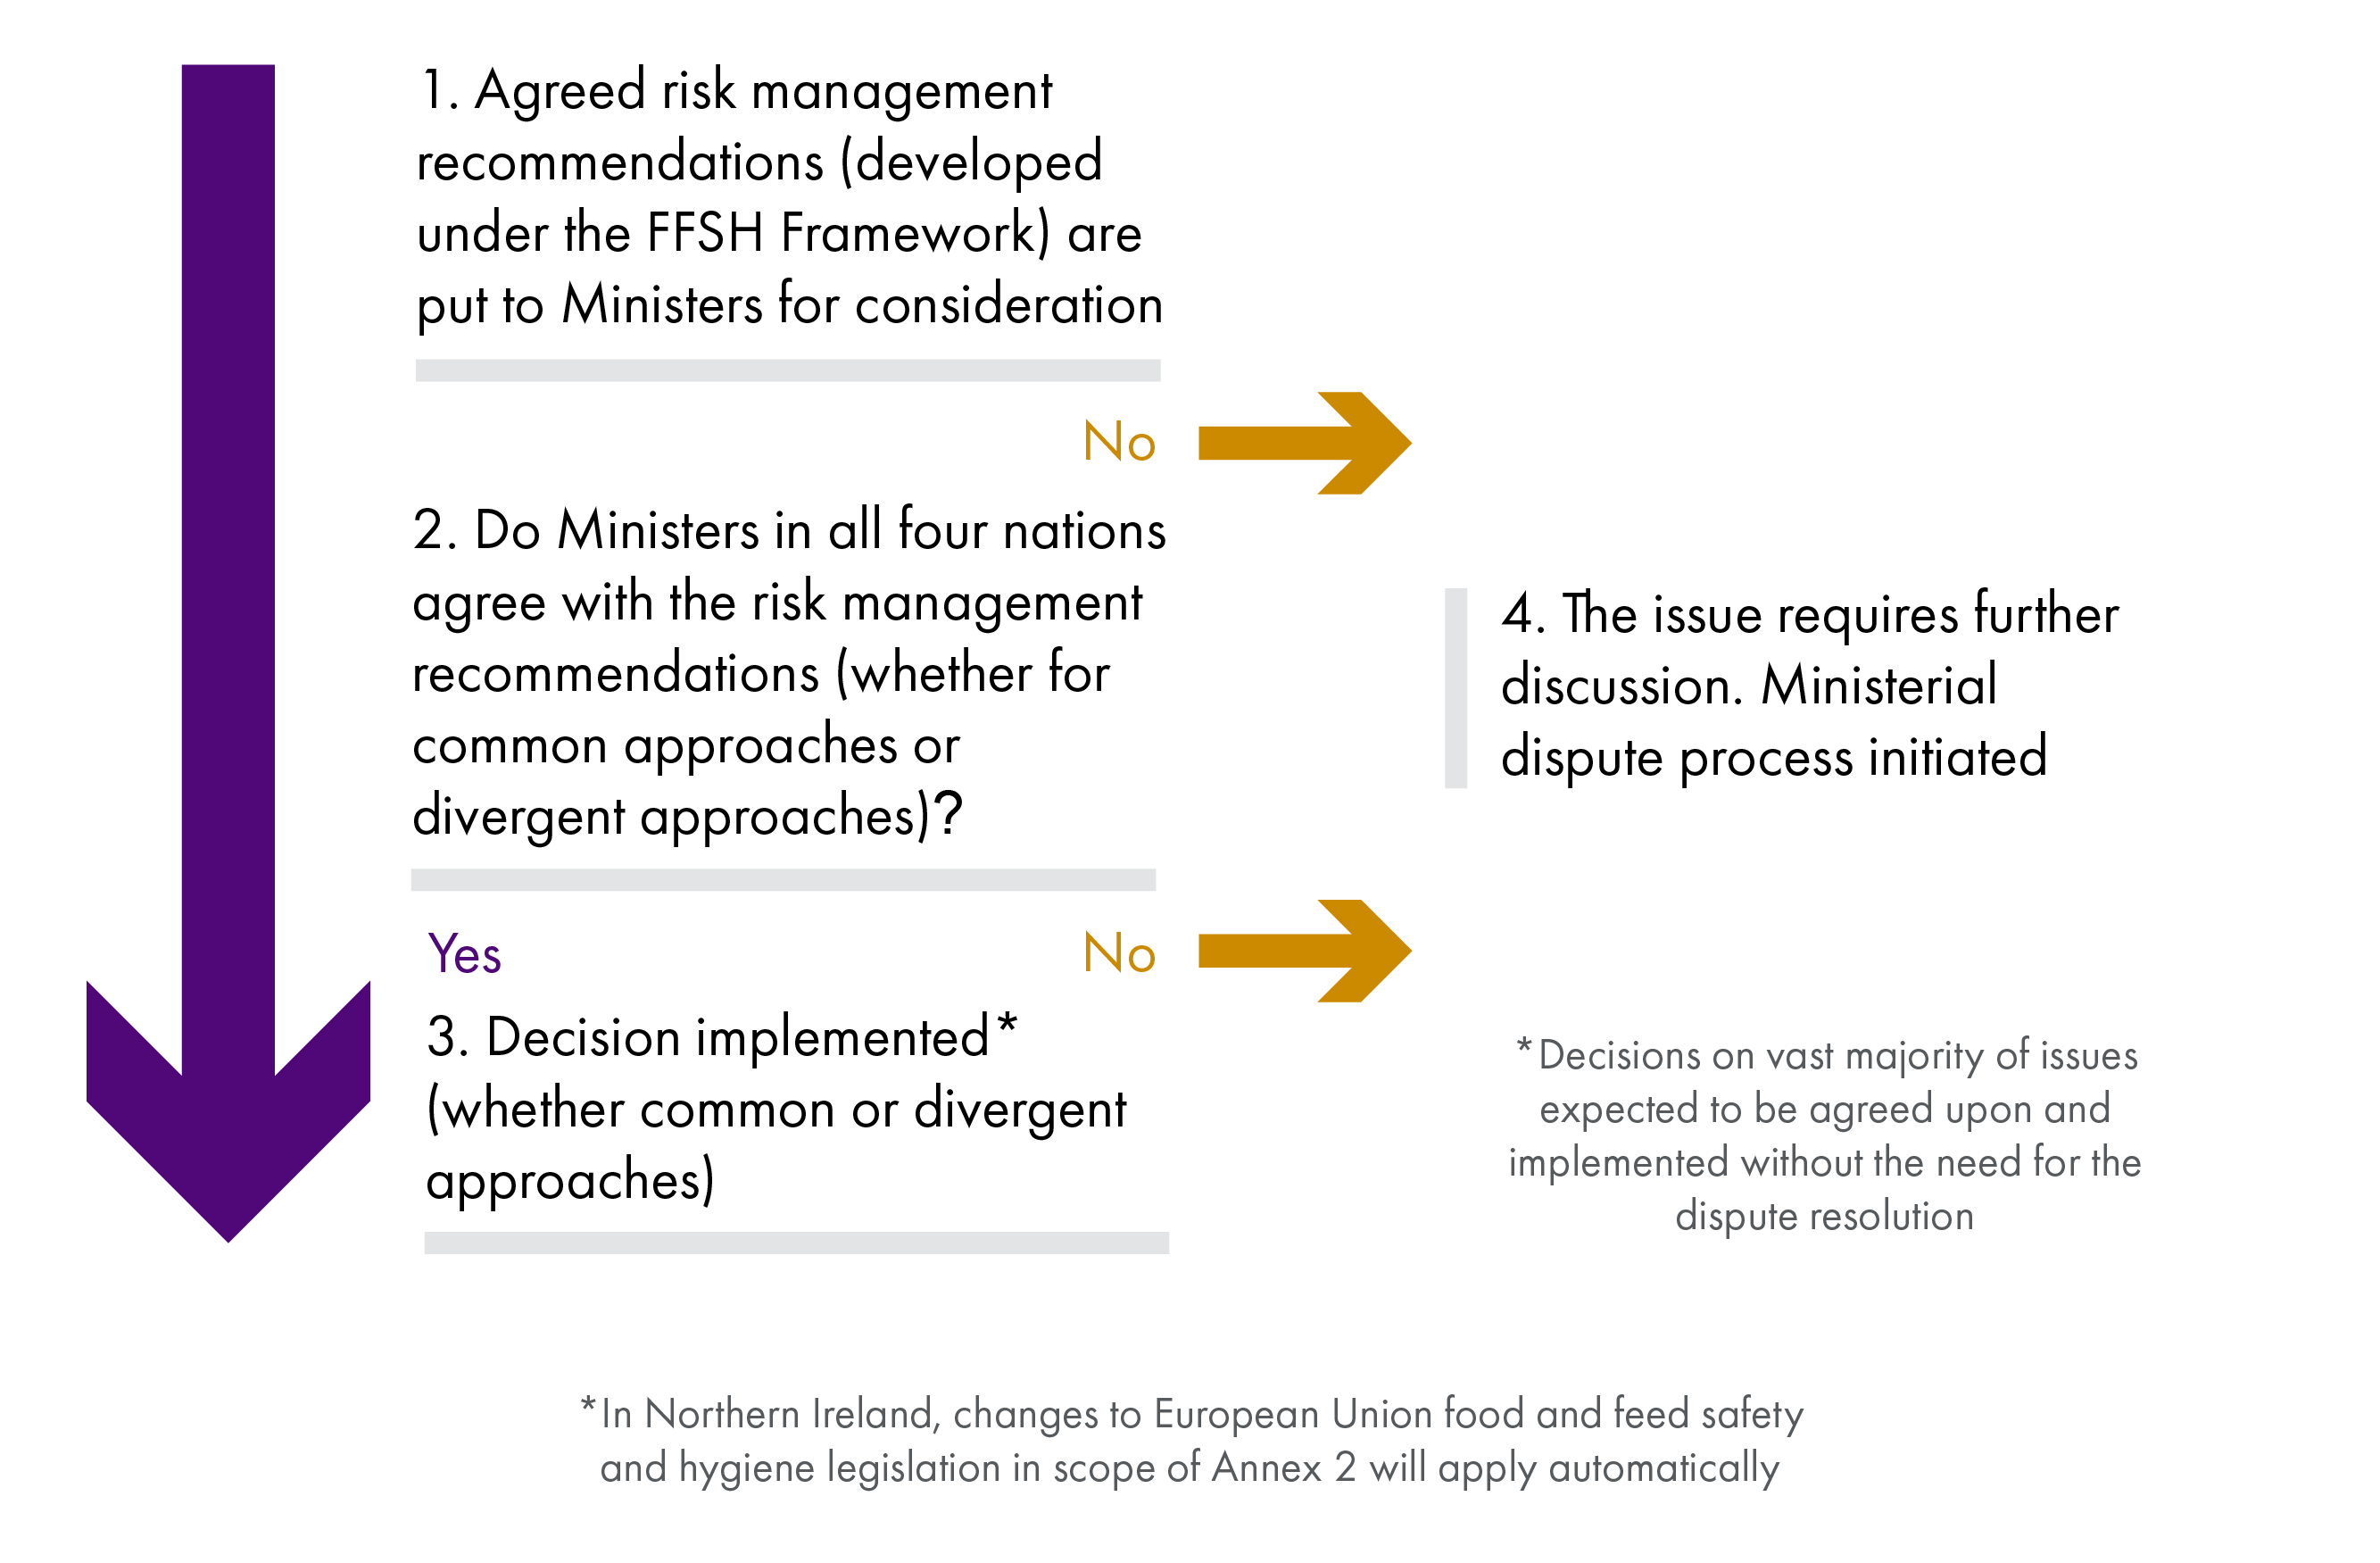 The diagram depicts a four stage decision-making process at the Ministerial level. At the first level, agreed risk management recommendations are put to Ministers for consideration. If the recommendation is agreed by Ministers in all for nations, it is implemented. However, if there is no consensus, the Ministerial dispute resolution process is initiated.